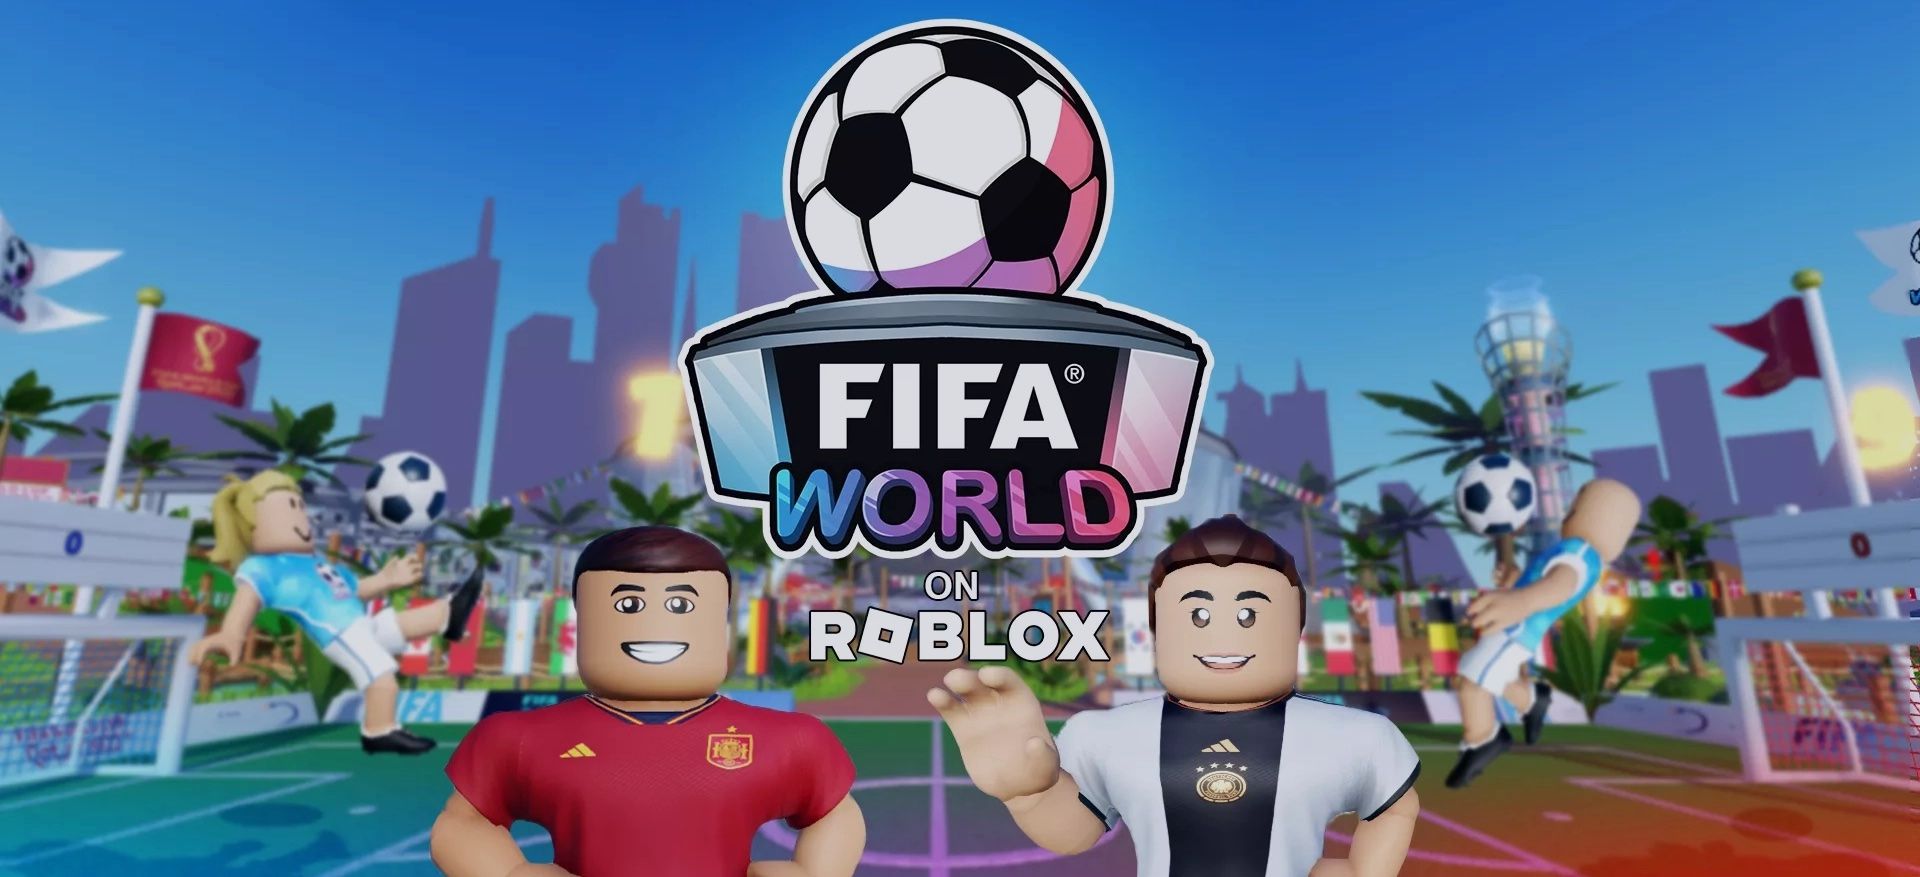 Rbolox has a new FIFA-backed World Cup game with ... bowling photo 1